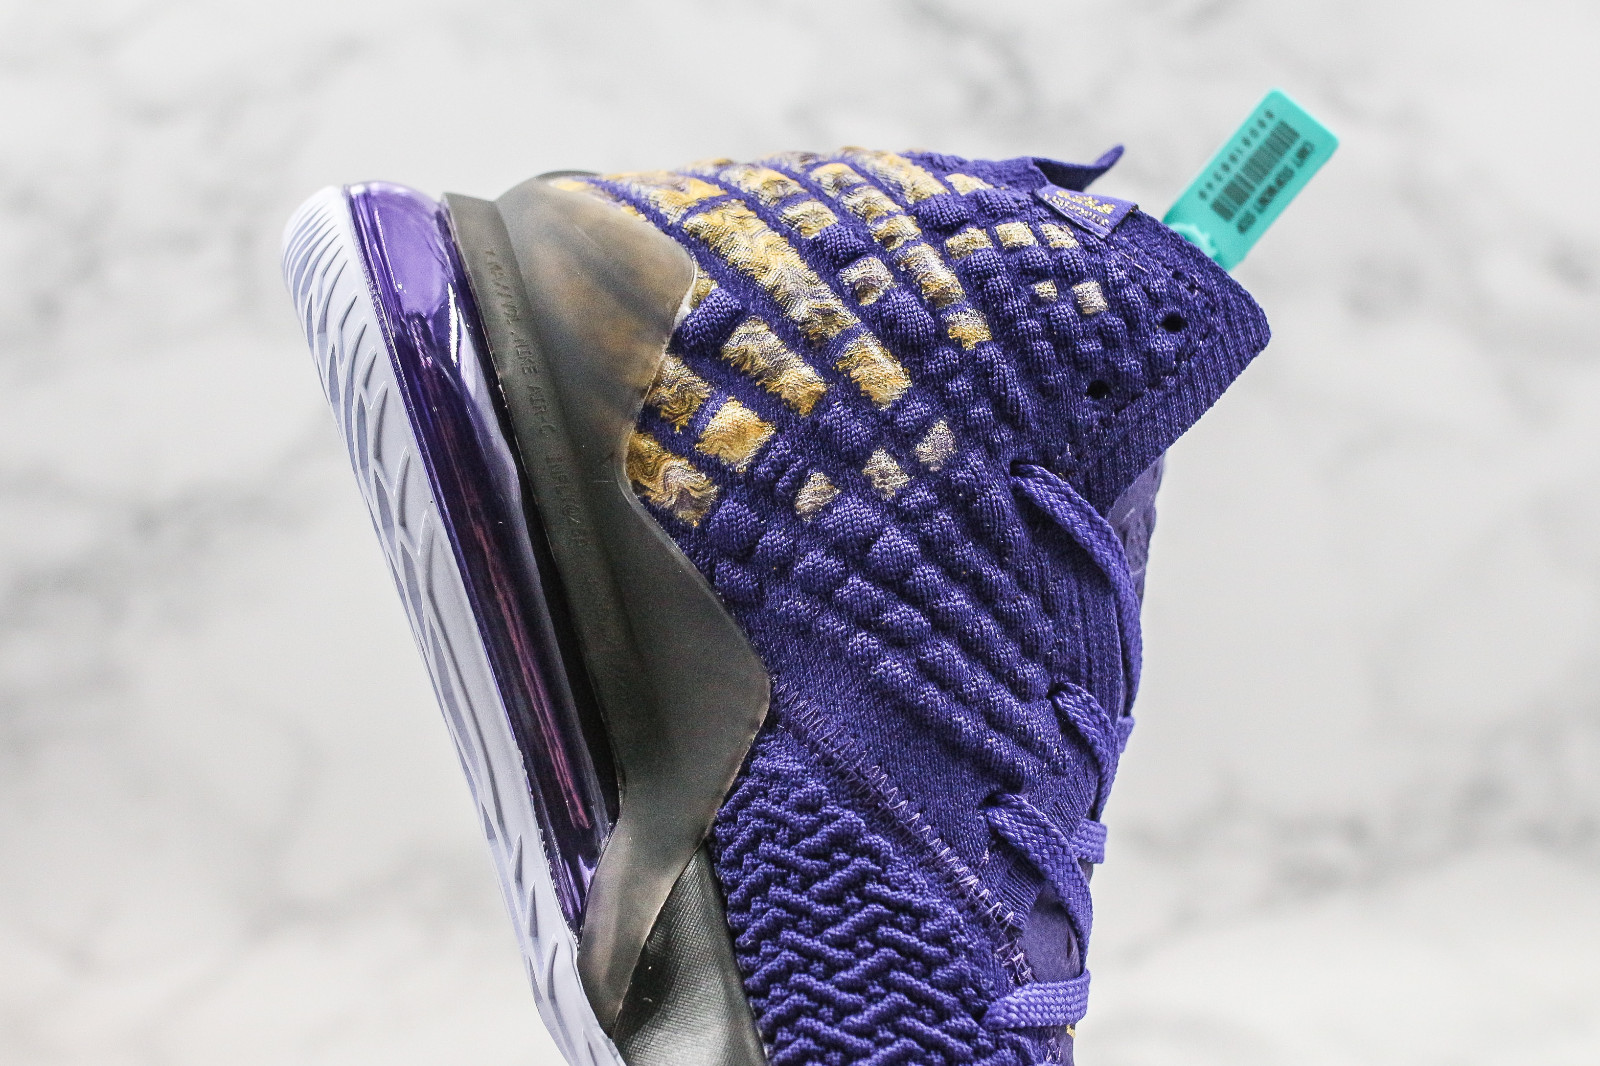 zapatillas de running On voladoras pie normal - Nike How do you feel the  sneaker culture in The Netherlands differs from the sneaker culture in the  UK Battleknit 2.0 White Purple Gold